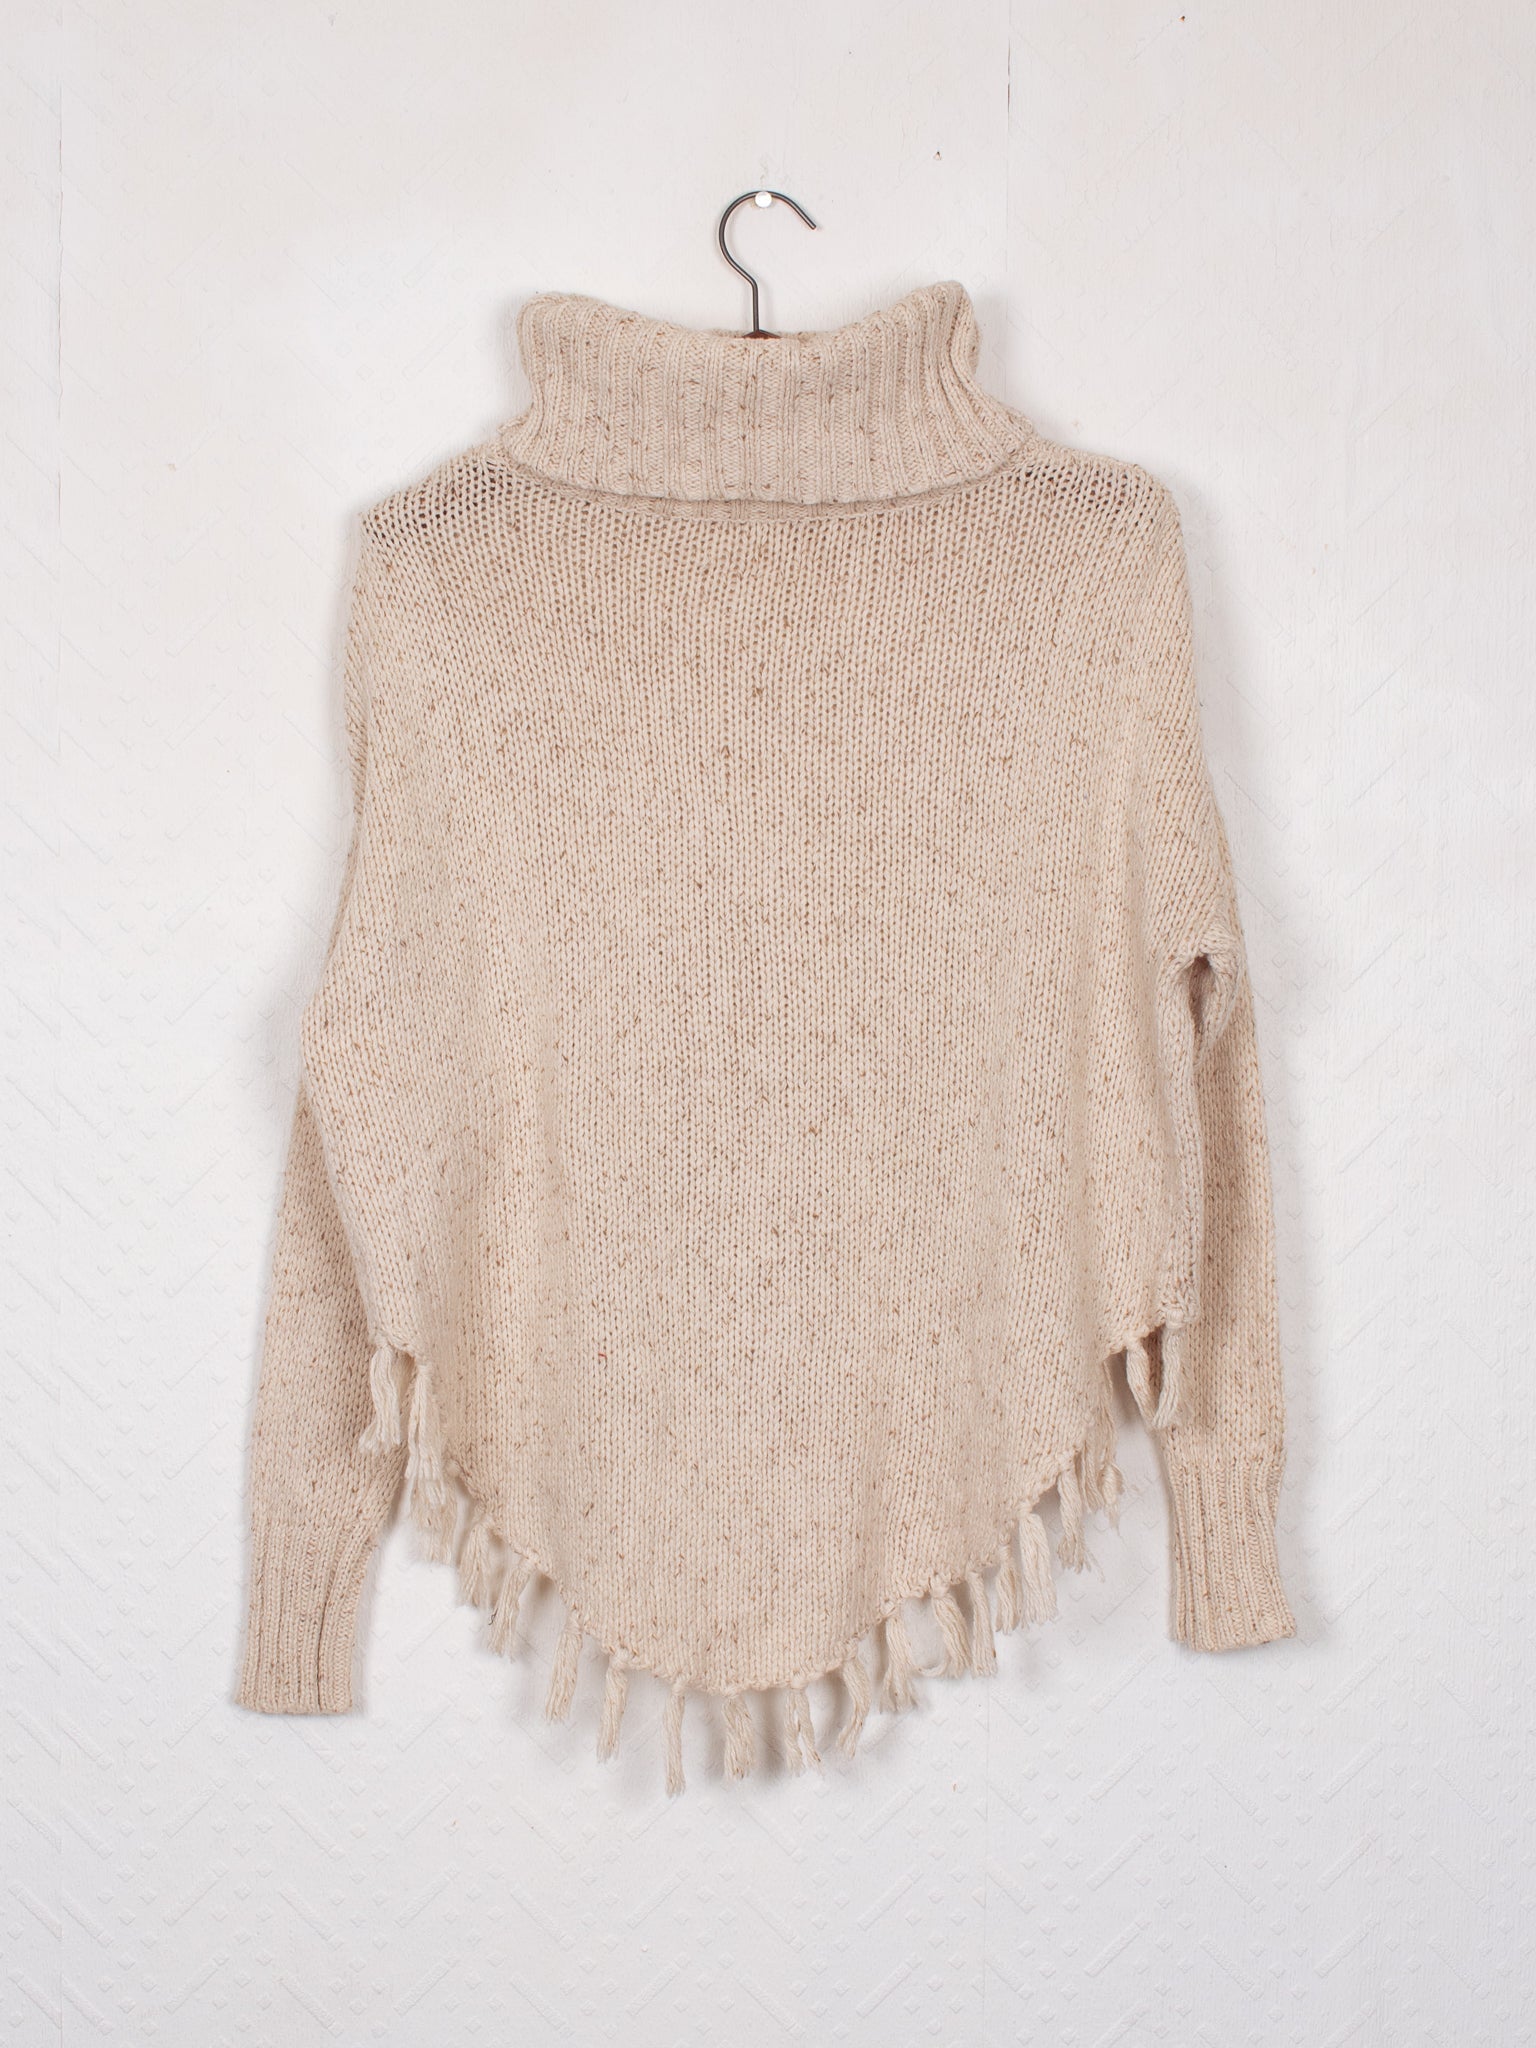 sweaters & knits 70s Hand-Knitted Turtle Neck Wool Jumper - M